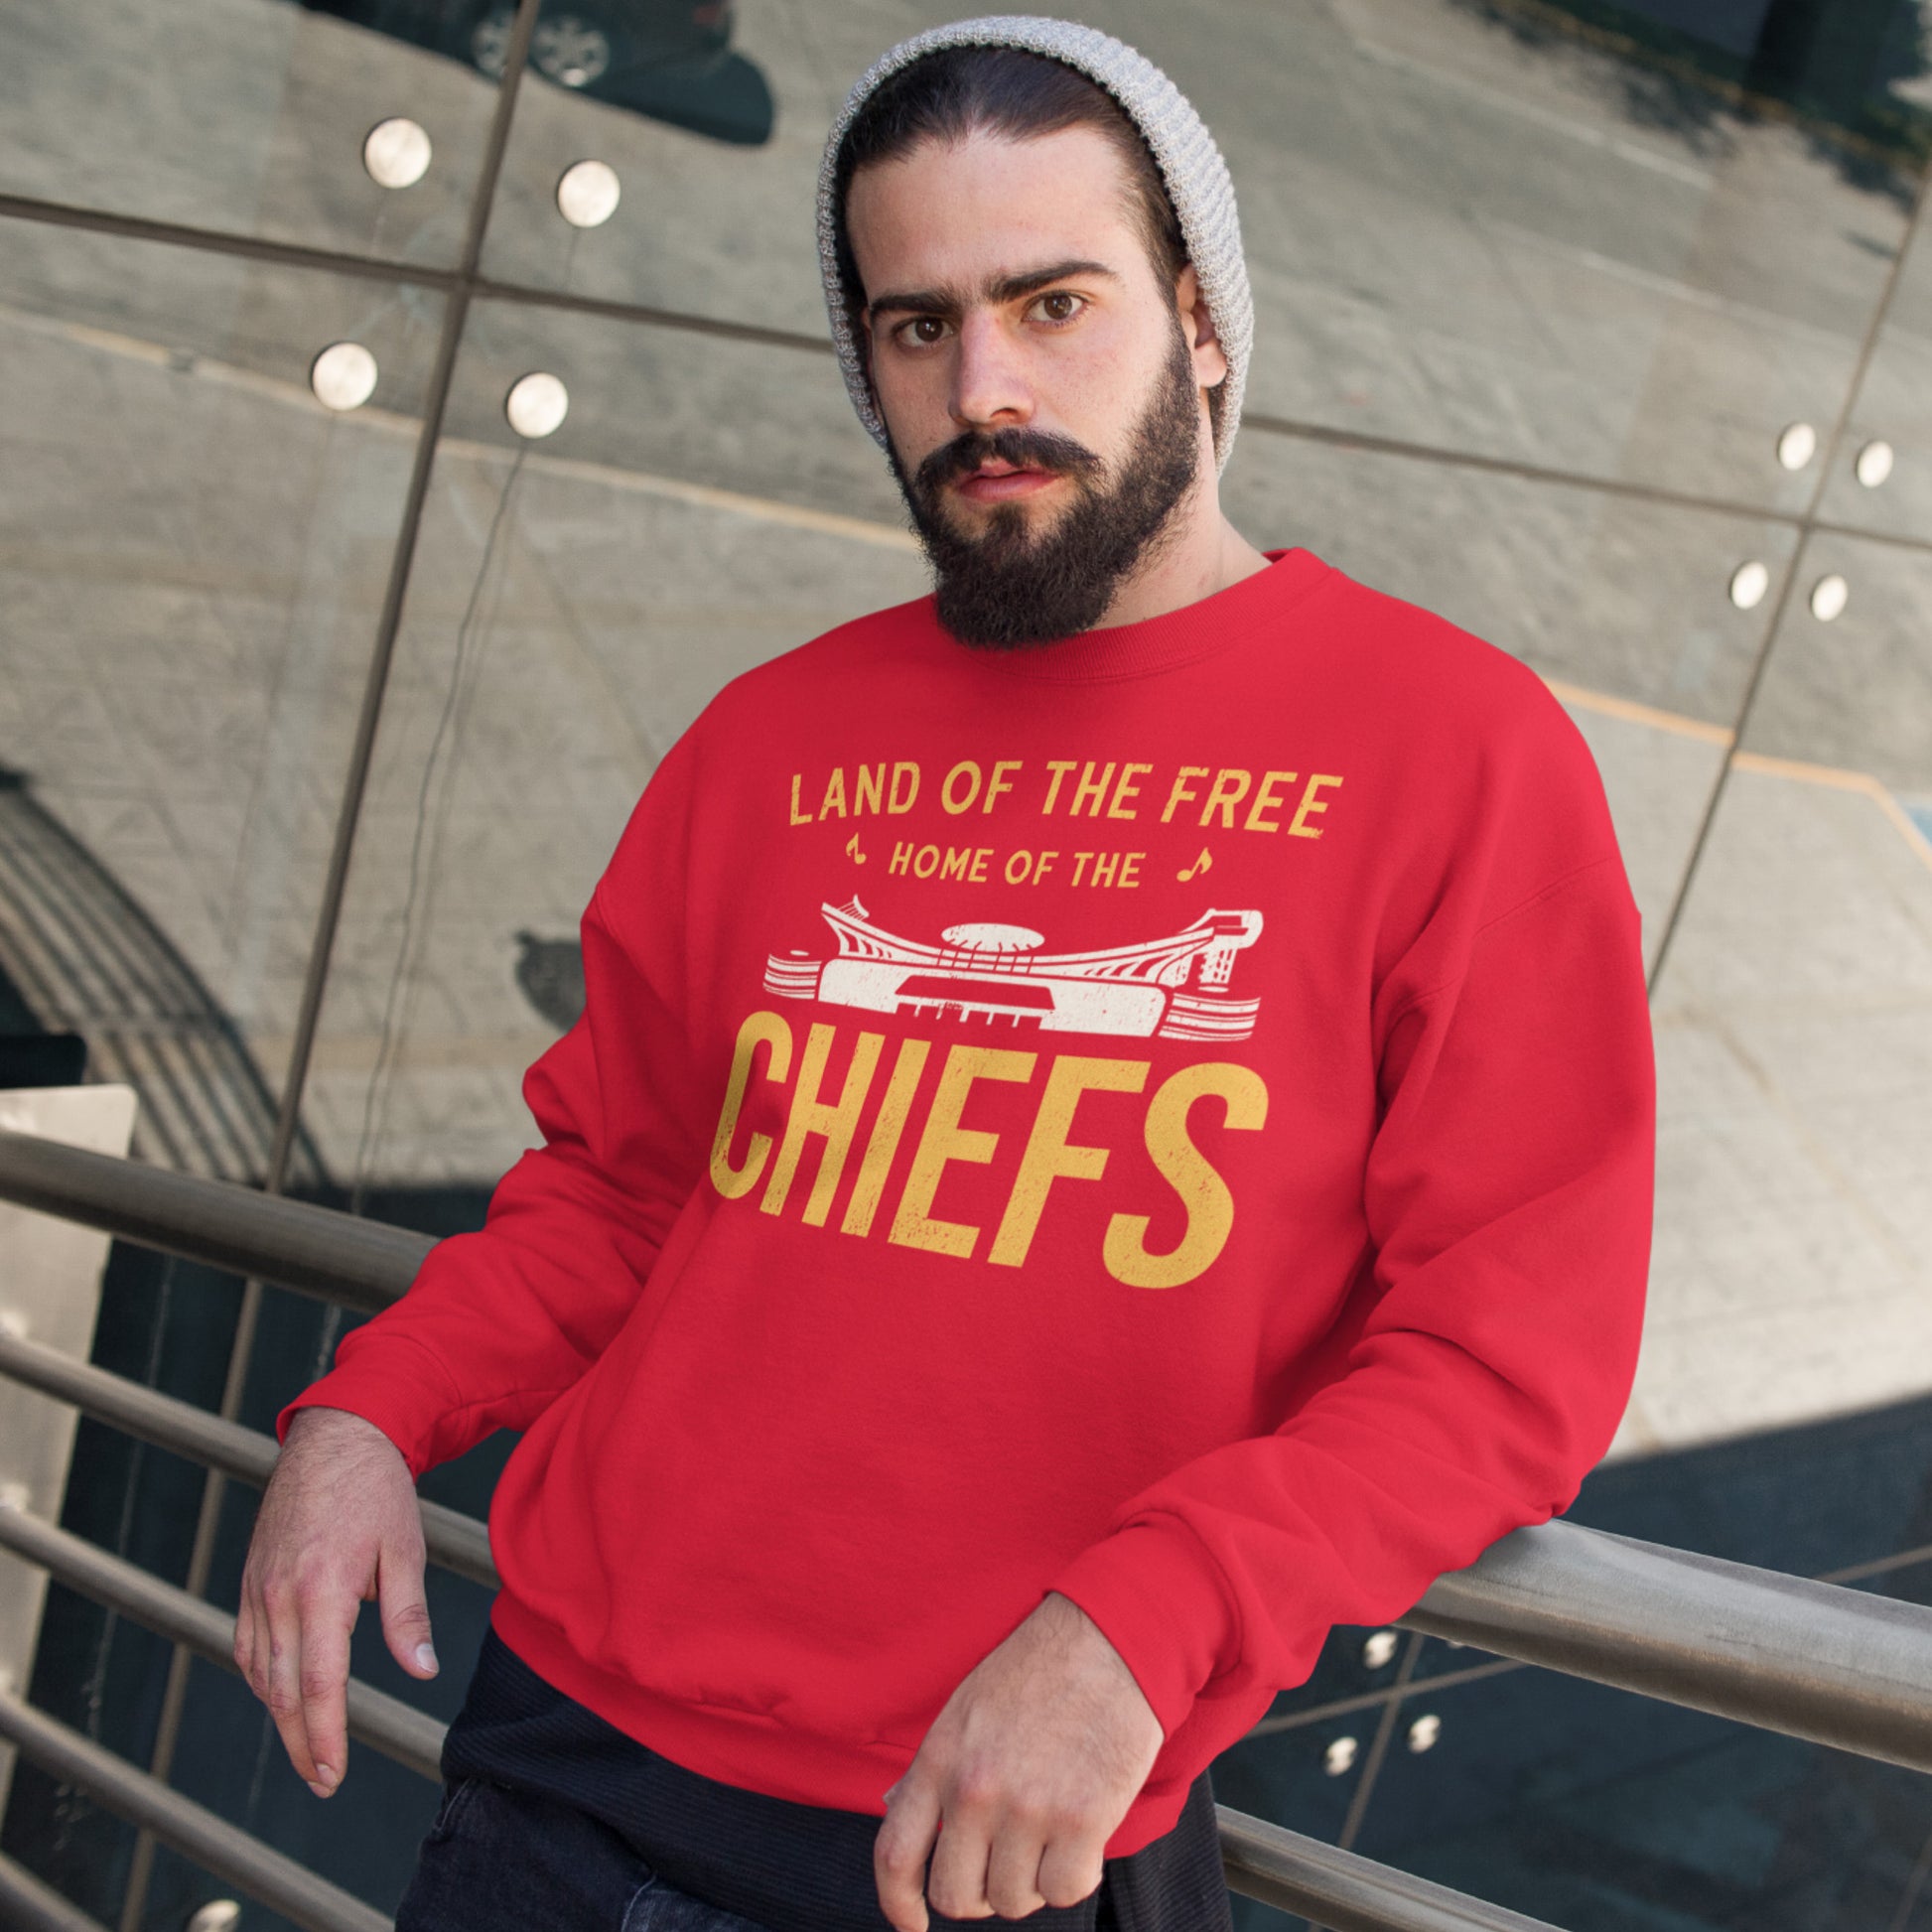 KC Swag Kansas City Chiefs Distressed White & Gold Home Of The Chiefs on a Red Crewneck Sweatshirt worn by a beaning wearing male model leaning on a rail in front of an outdoor mirrored wall